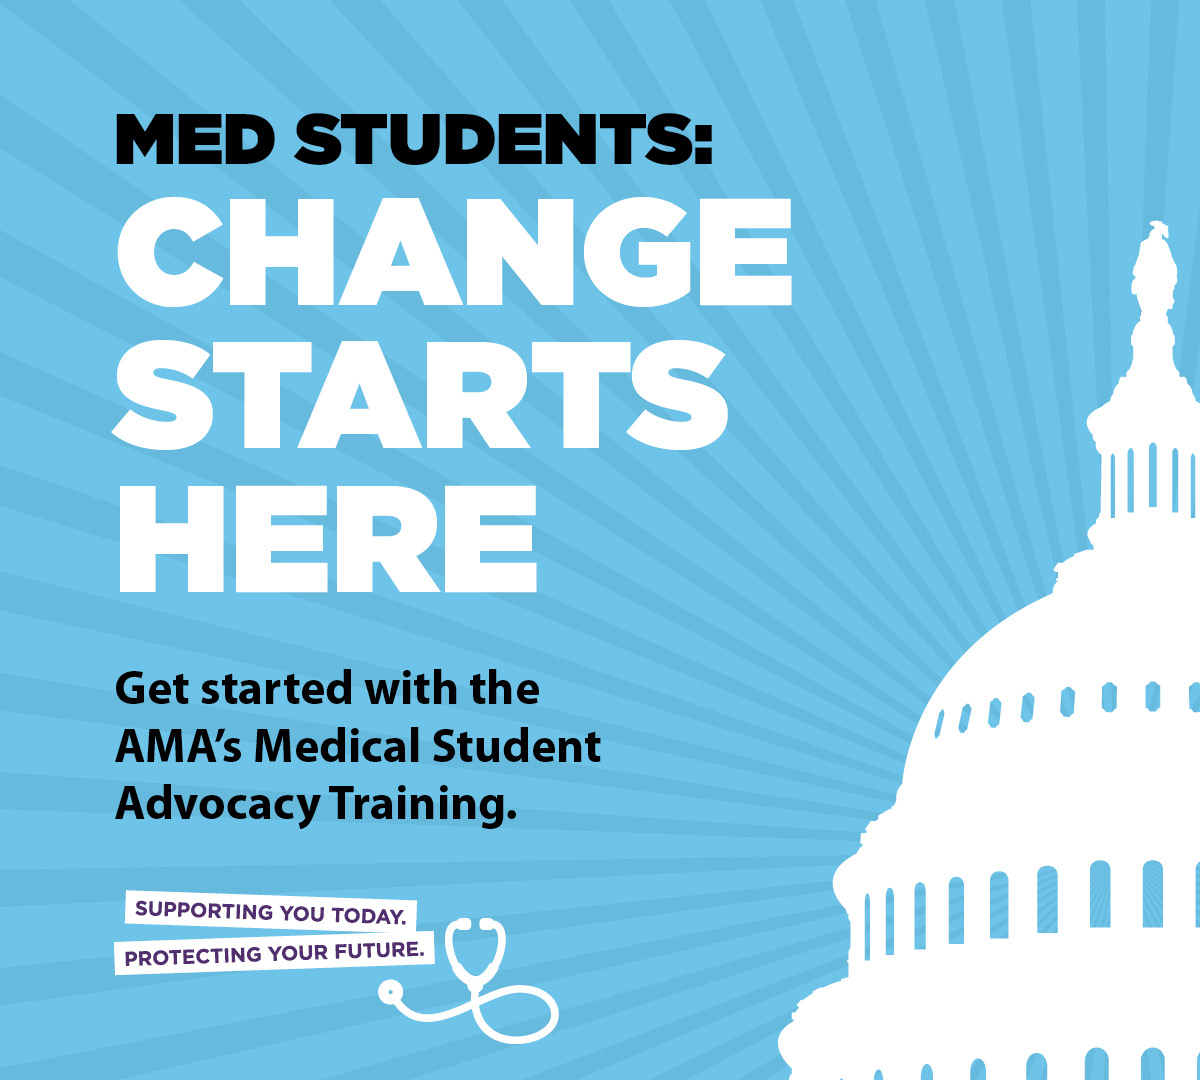 #OurAMA #medstudent members now have the opportunity to complete advocacy training anytime, anywhere with the new on-demand advocacy training program. Watch now. spr.ly/6016kSWK0